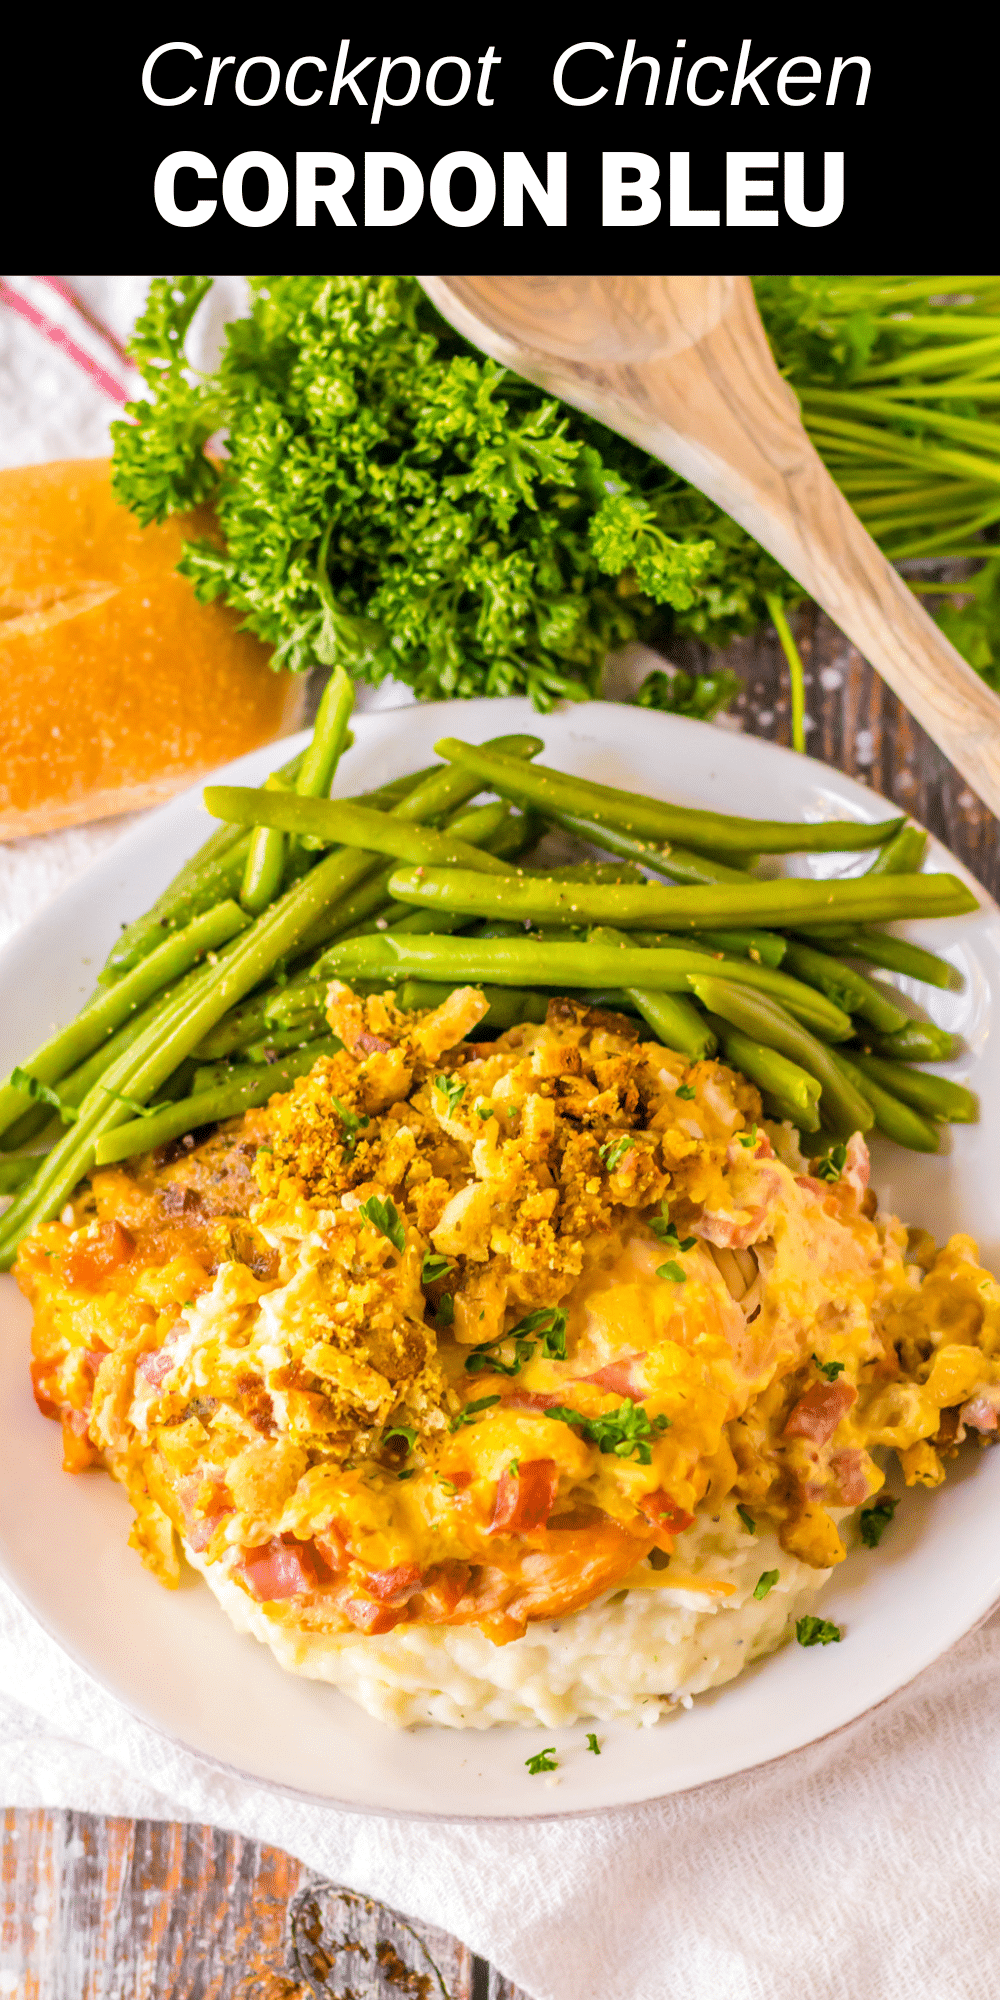 This Crockpot chicken cordon bleu is a delicious slow cooker meal that the whole family will love. Warm, creamy, and full of flavor, this recipe is great all year.